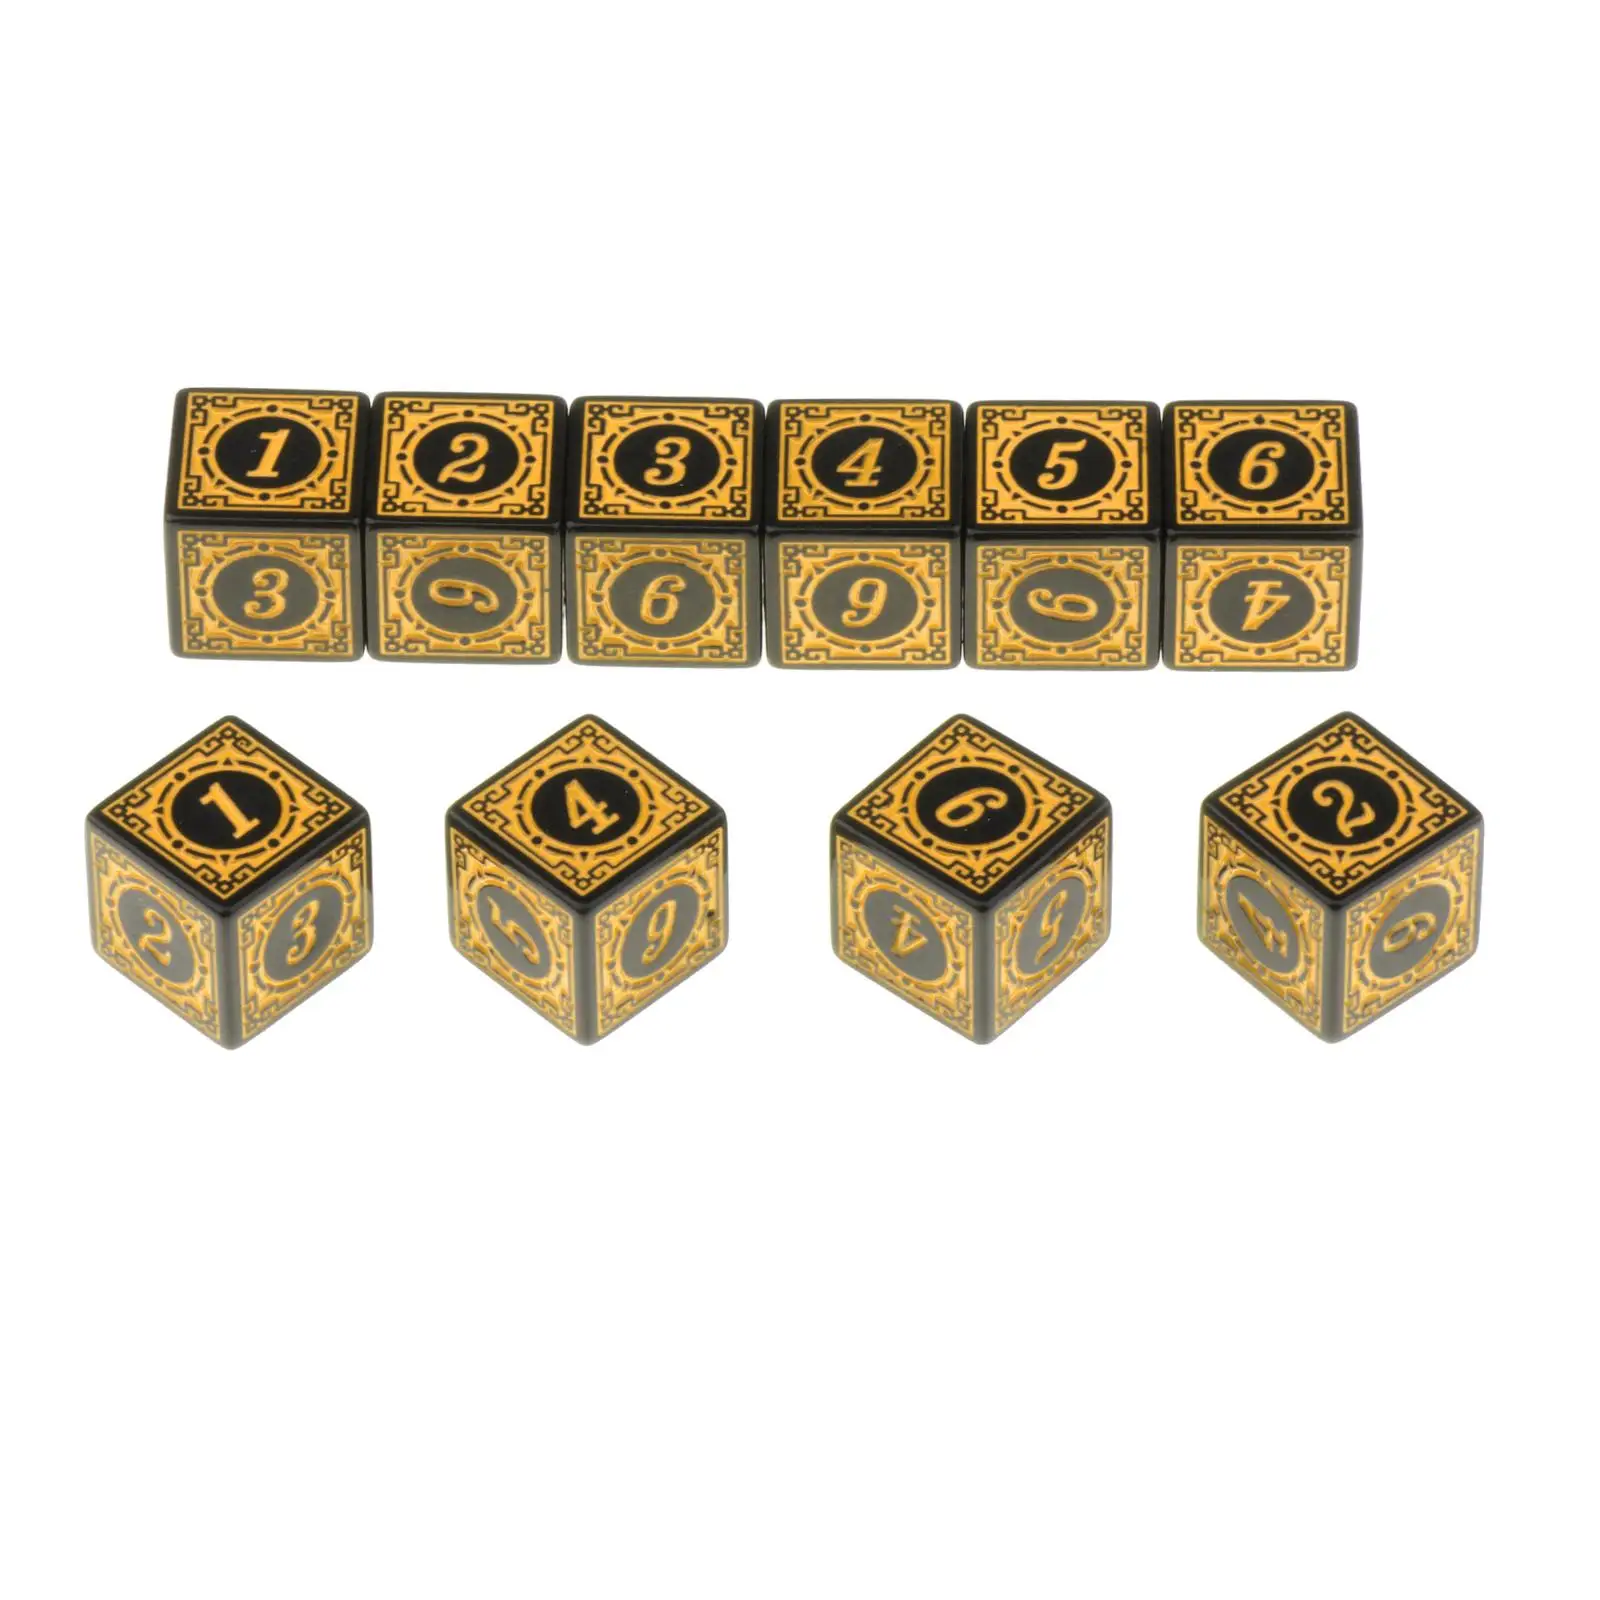 10pcs/set 6 Side Polyhedral Dice Toys Multi Sided Acrylic Dices for Table Board Game Playing Games Dice